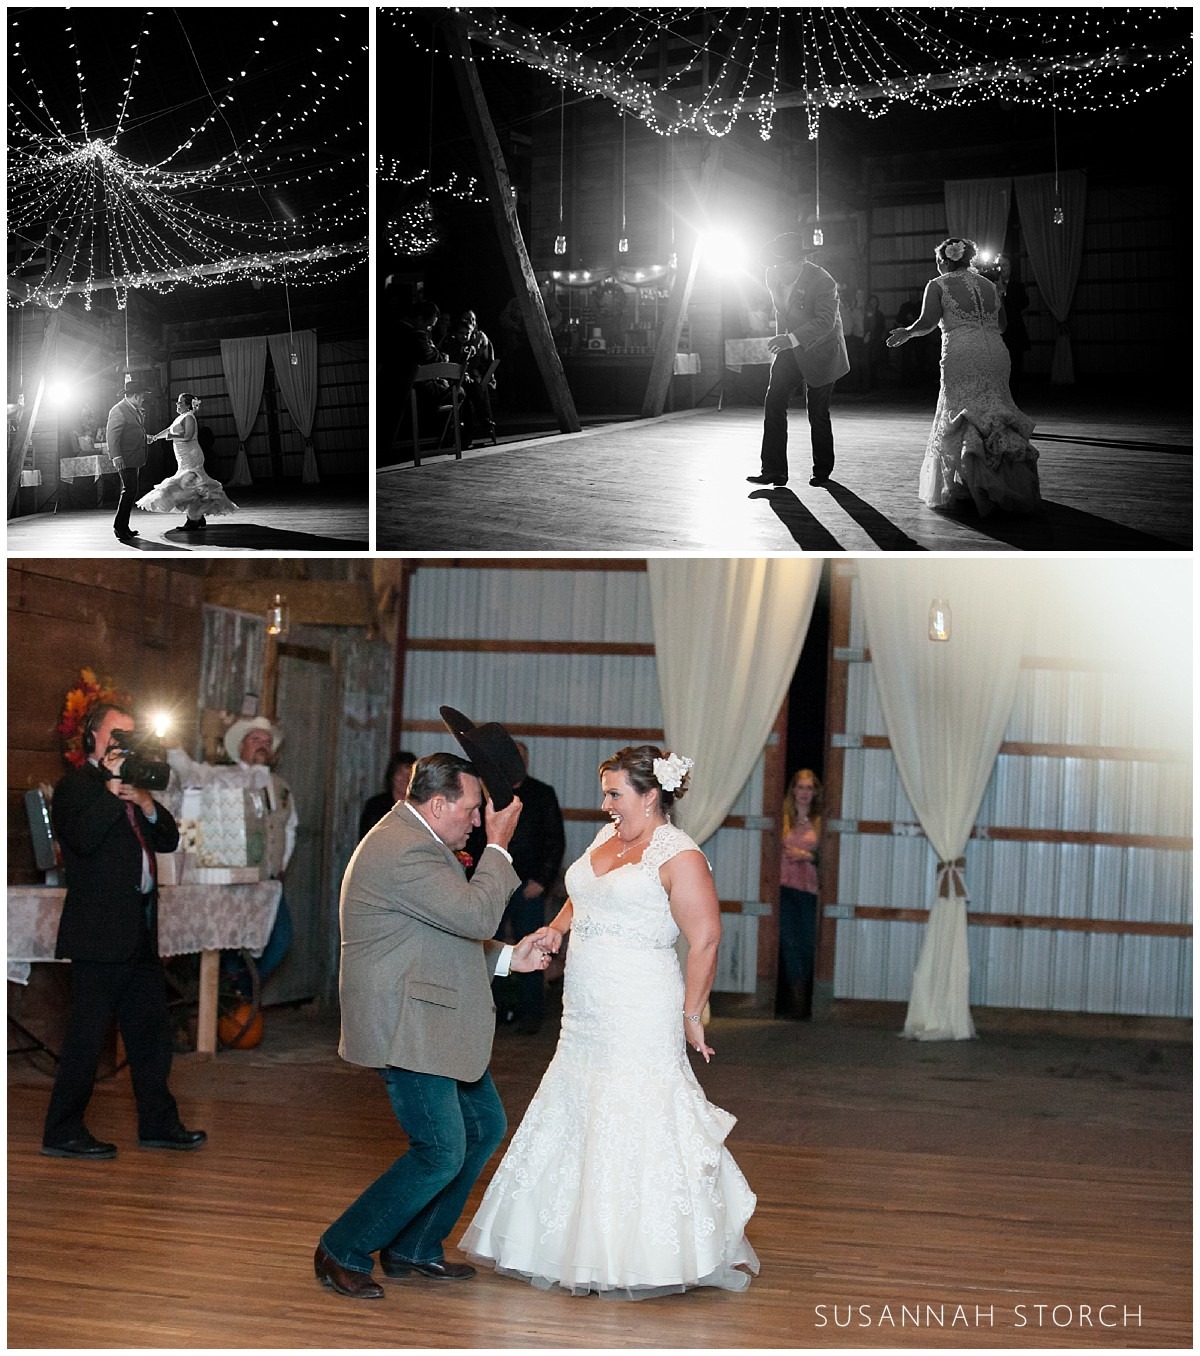 three images of the father-daughter dance